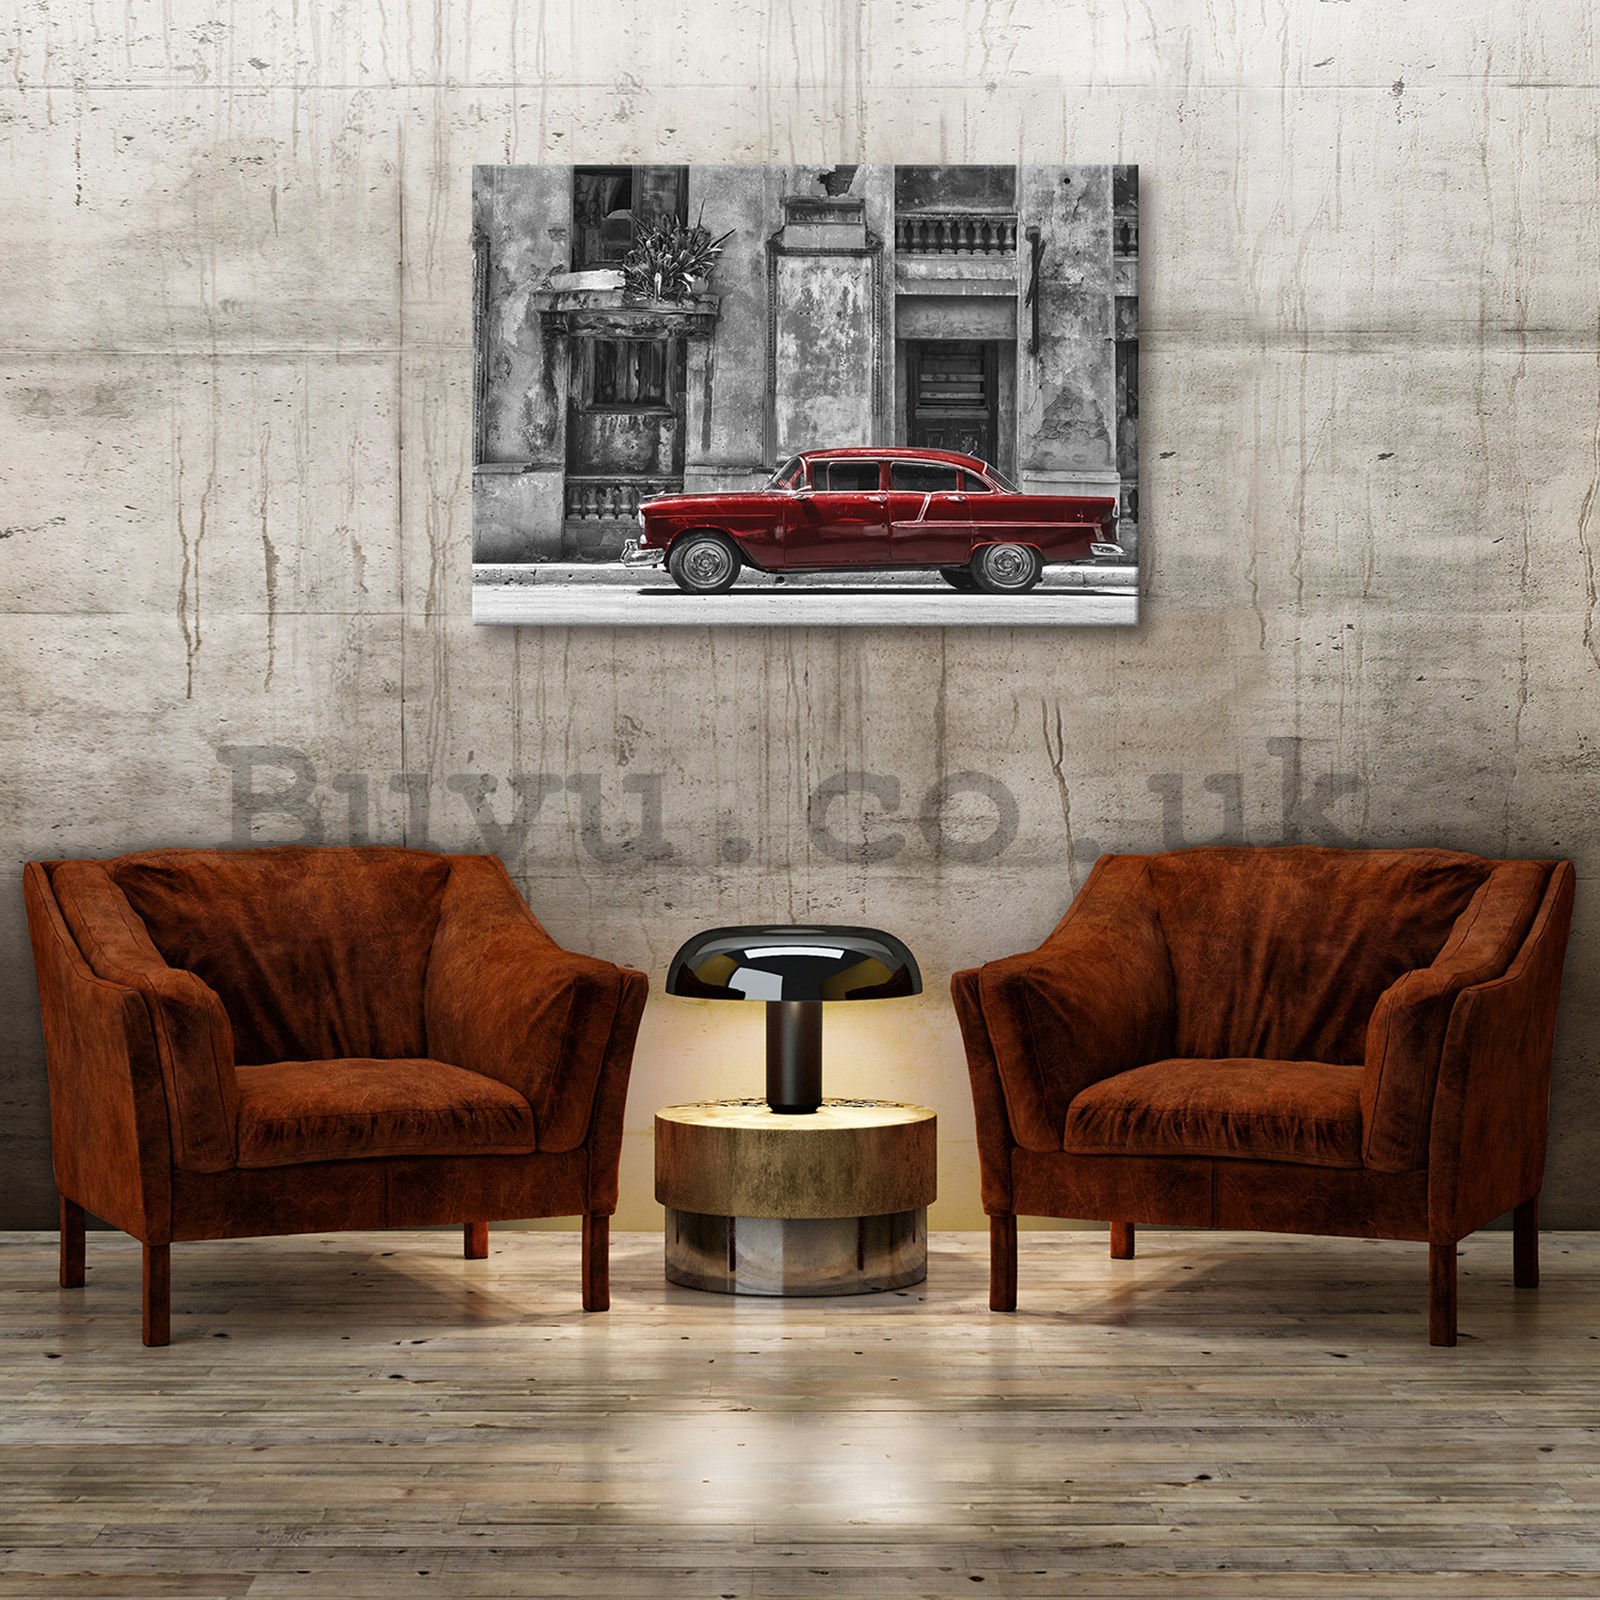 Painting on canvas: Cuban street red car - 100x75 cm